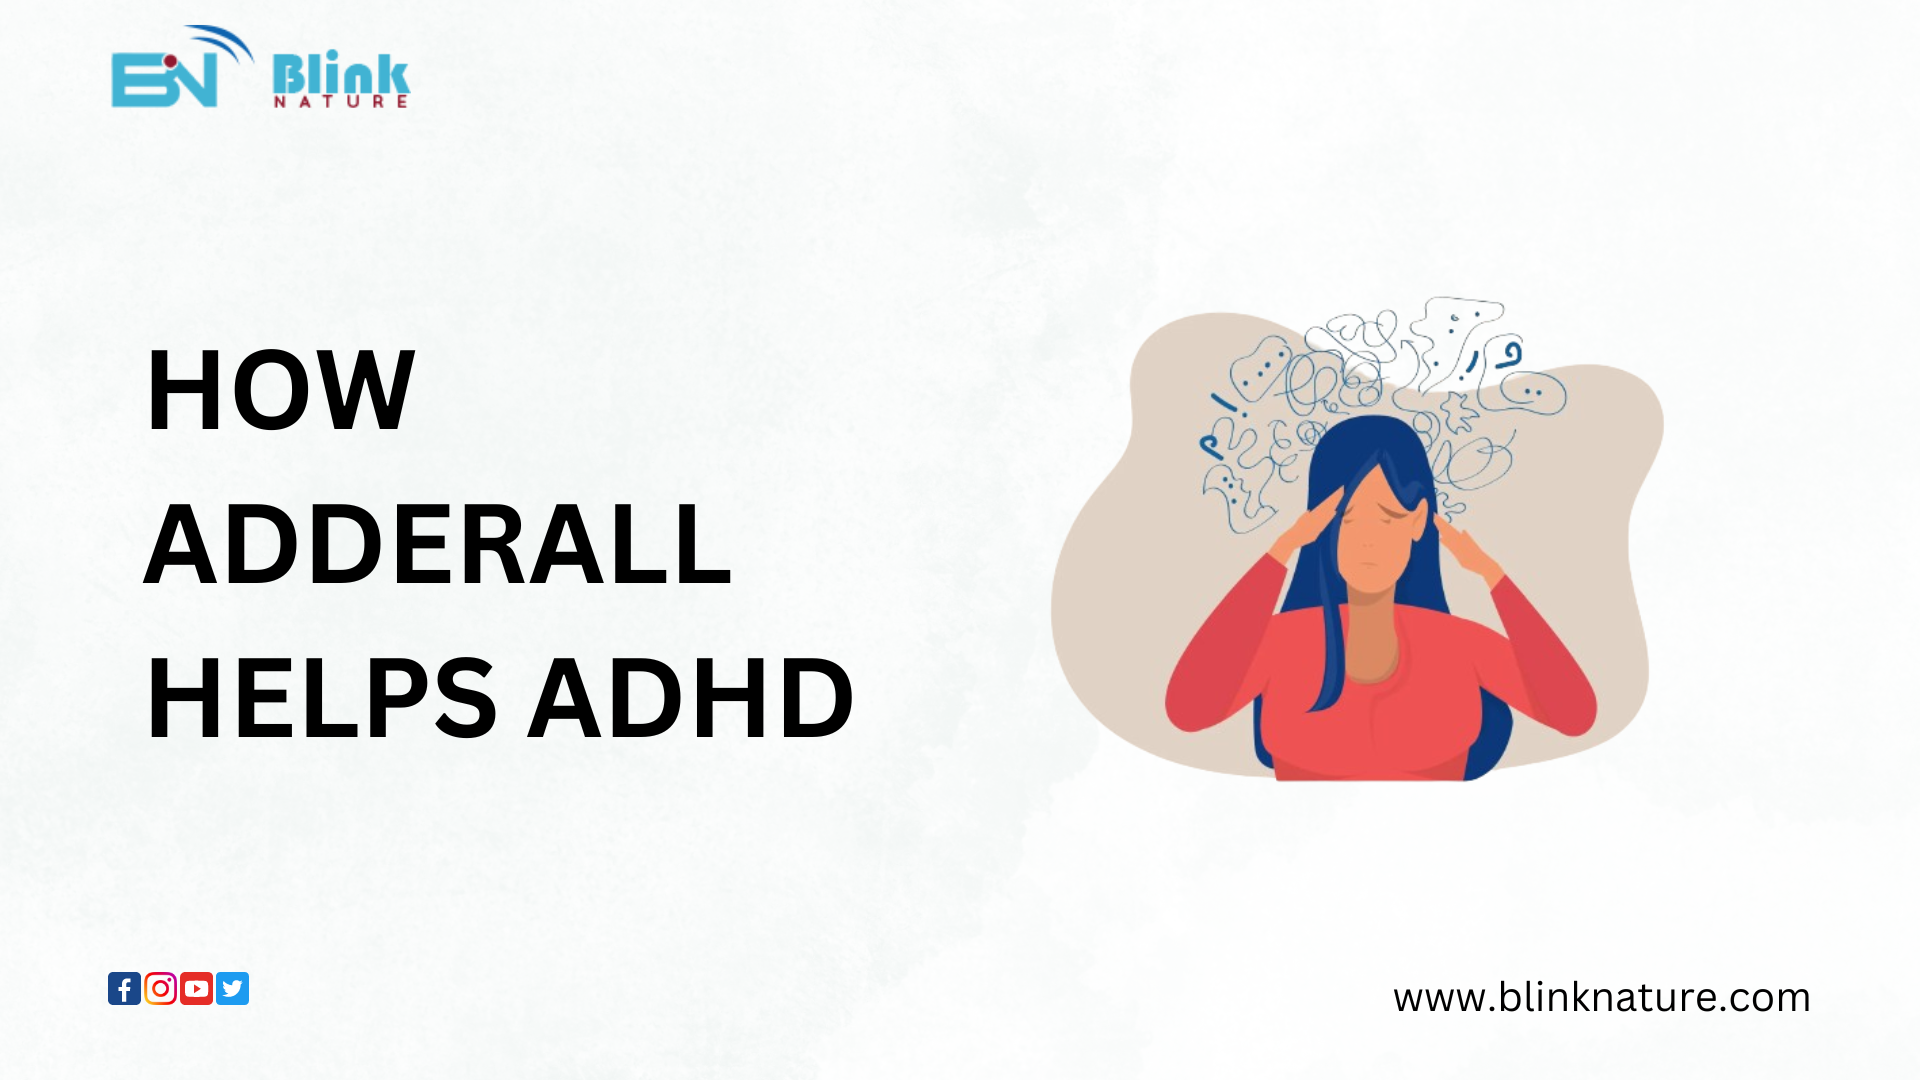 How Adderall helps ADHD?